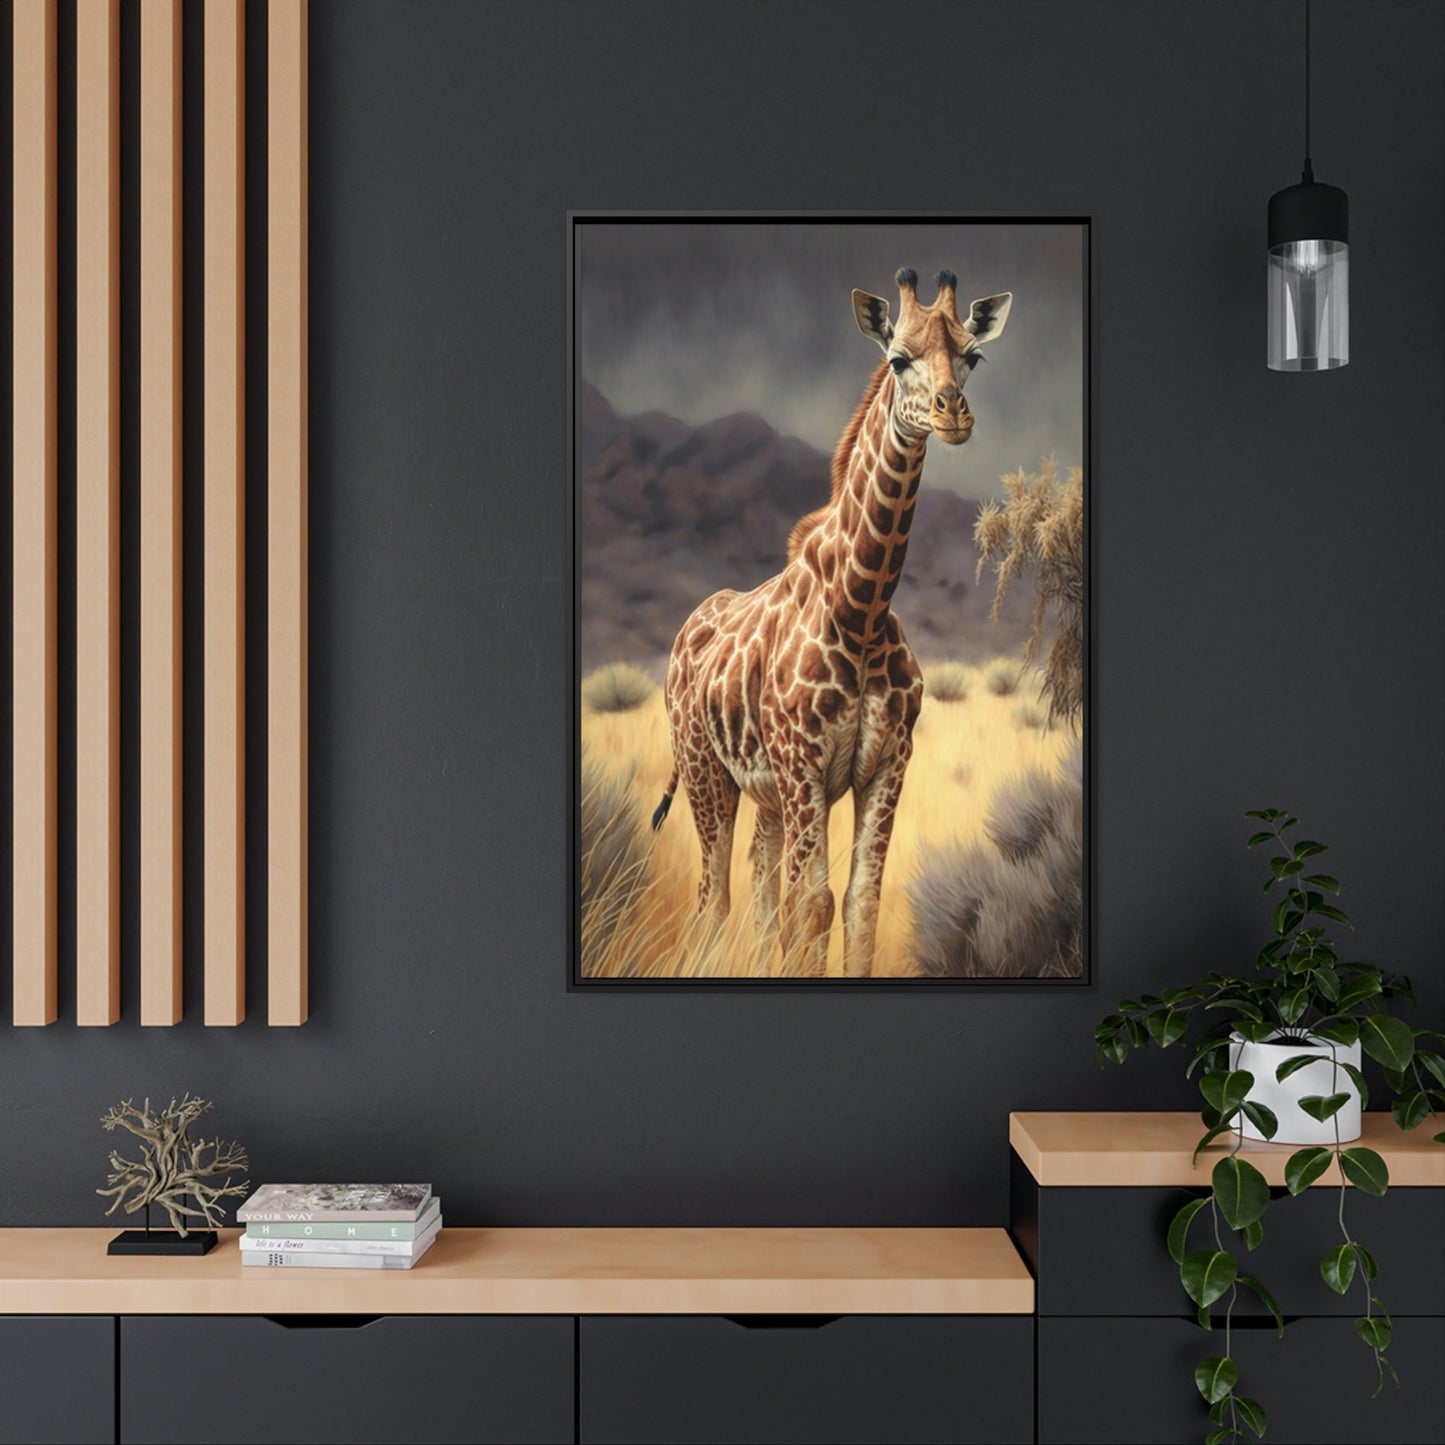 The Majesty of Giraffes: Framed Canvas & Poster of Stunning Beauty